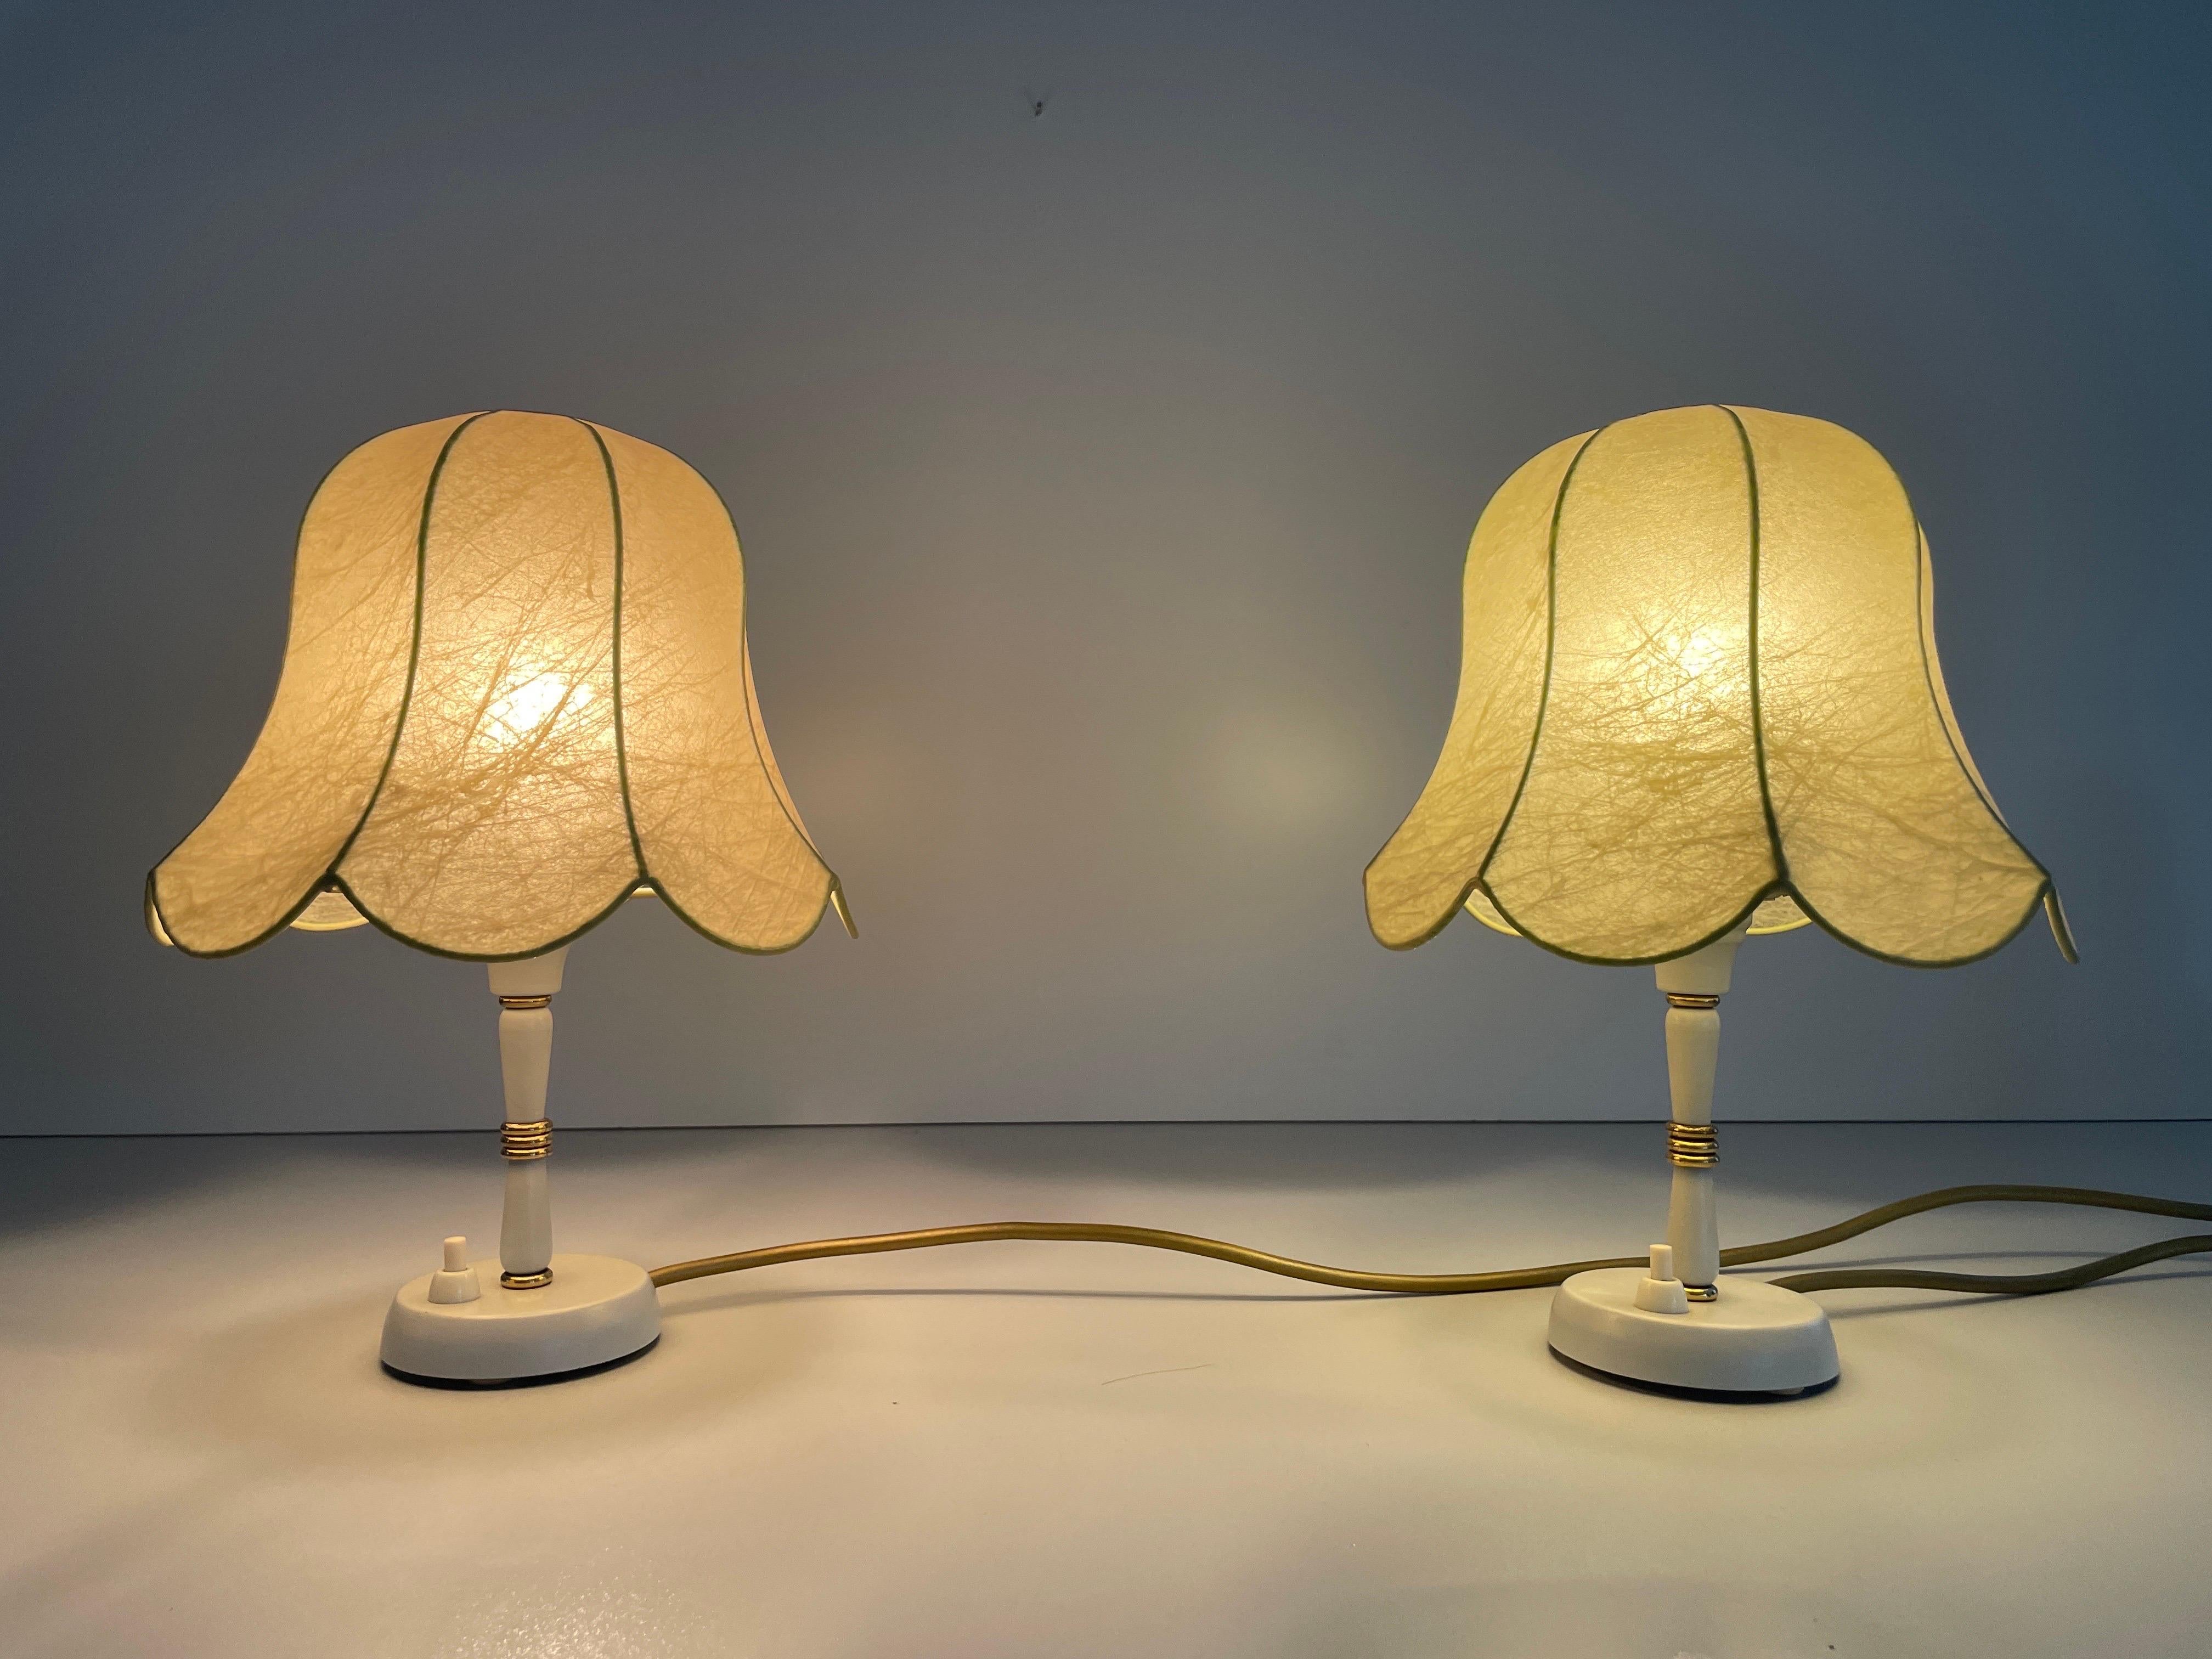 Cocoon Shade Metal Body Pair of Bedside Lamps by GOLDKANT, 1970s, Germany For Sale 6